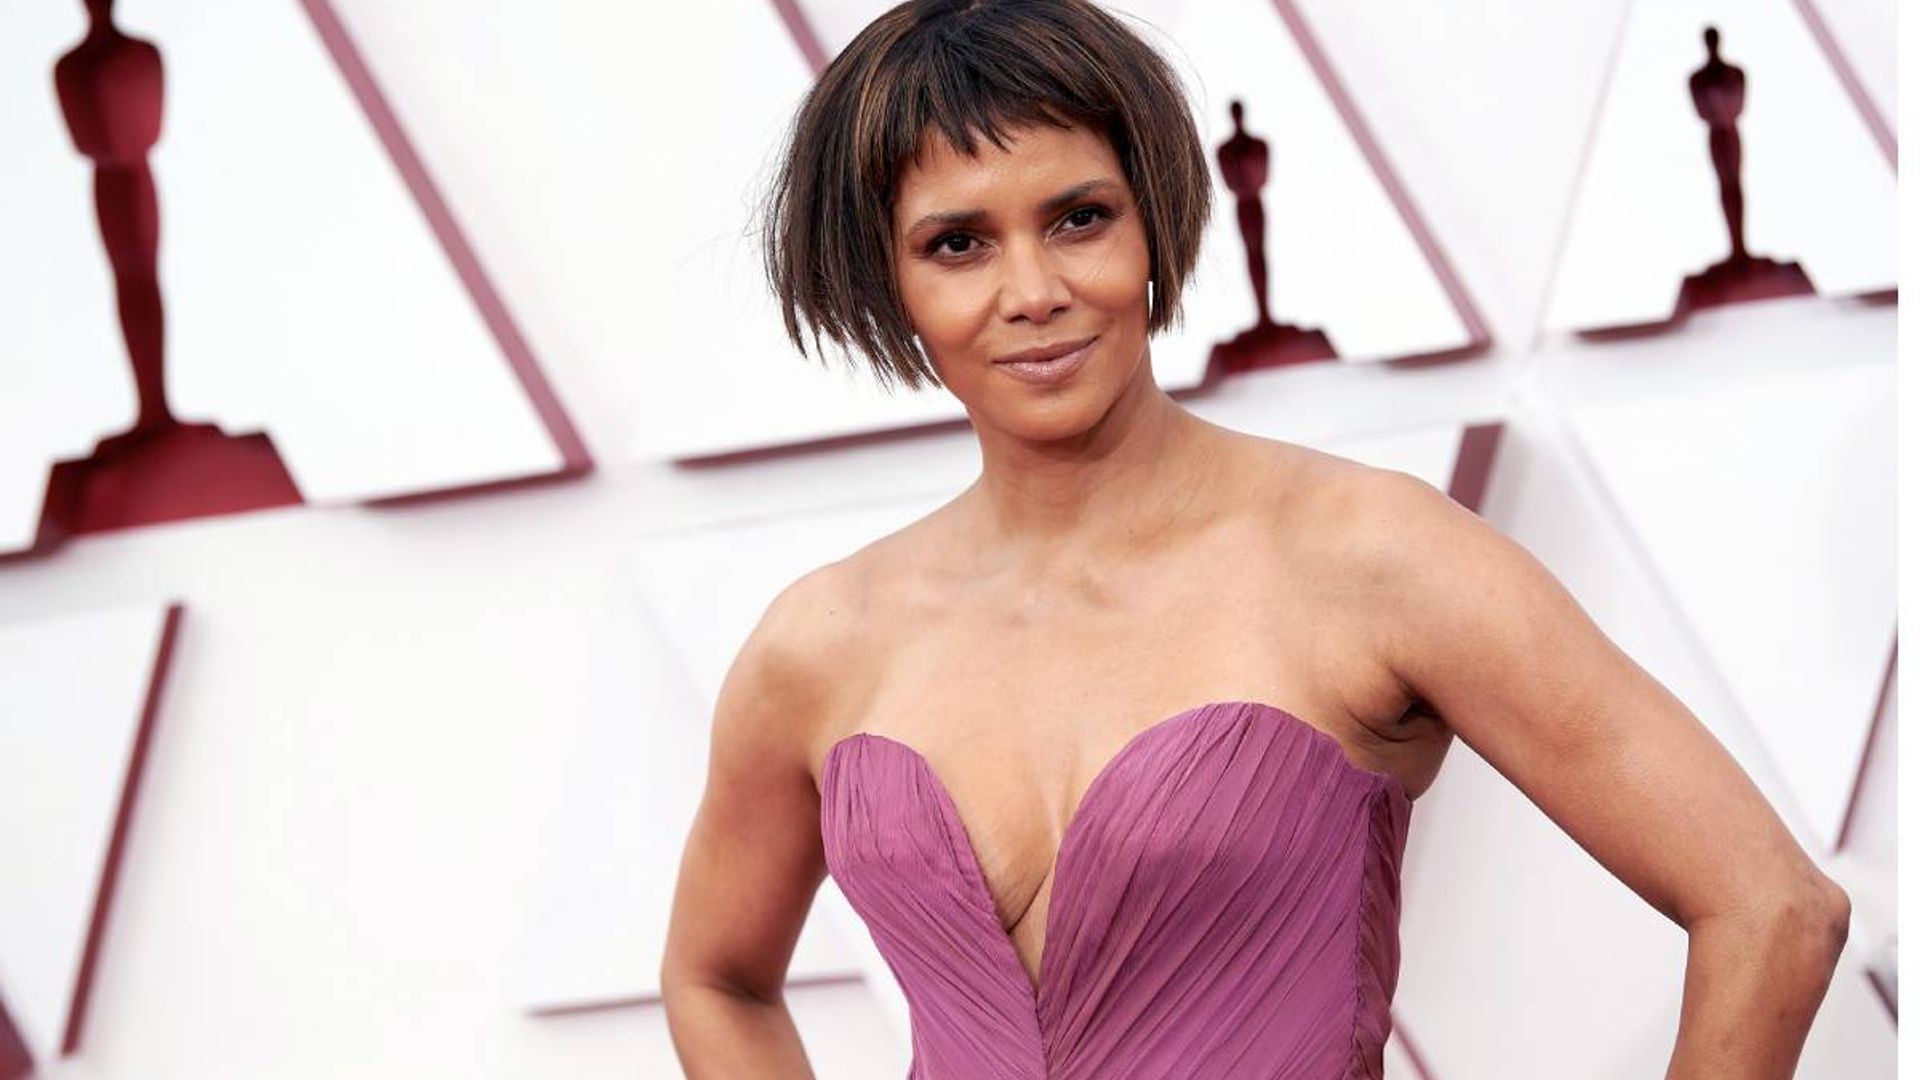 Halle Berry shared a secret detail from her Oscars look - and fans are going wild 